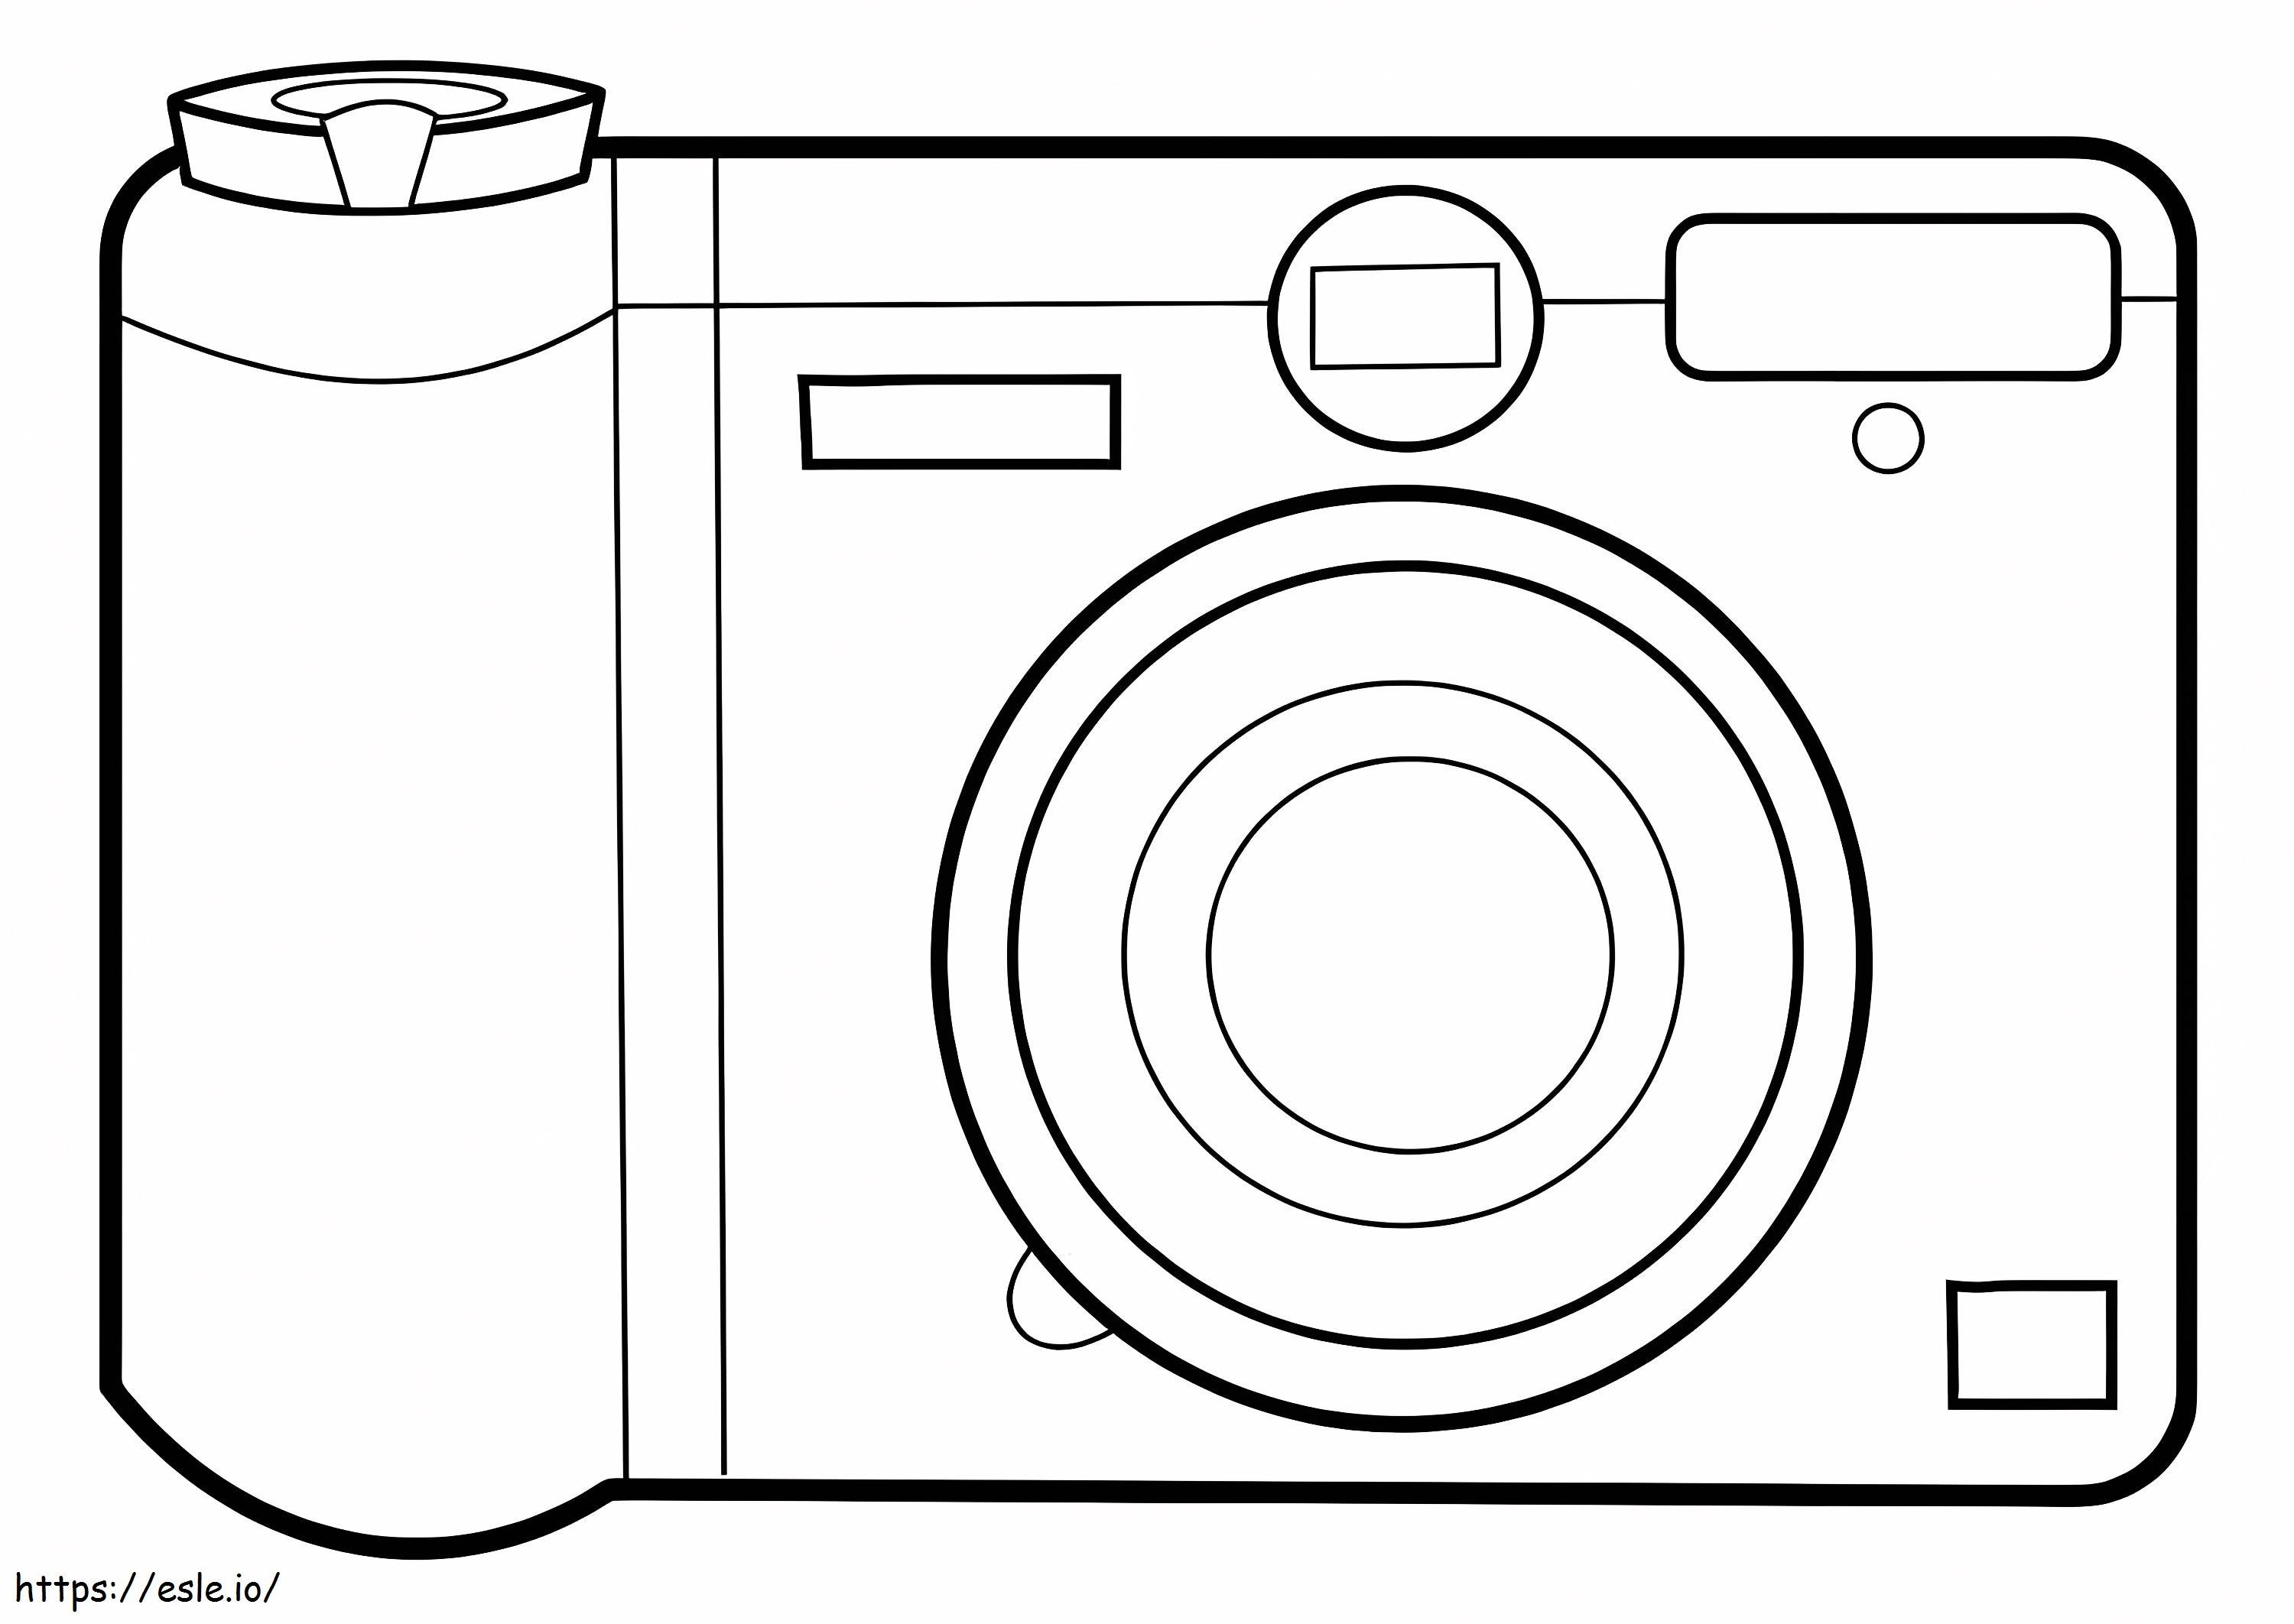 Simple Camera coloring page